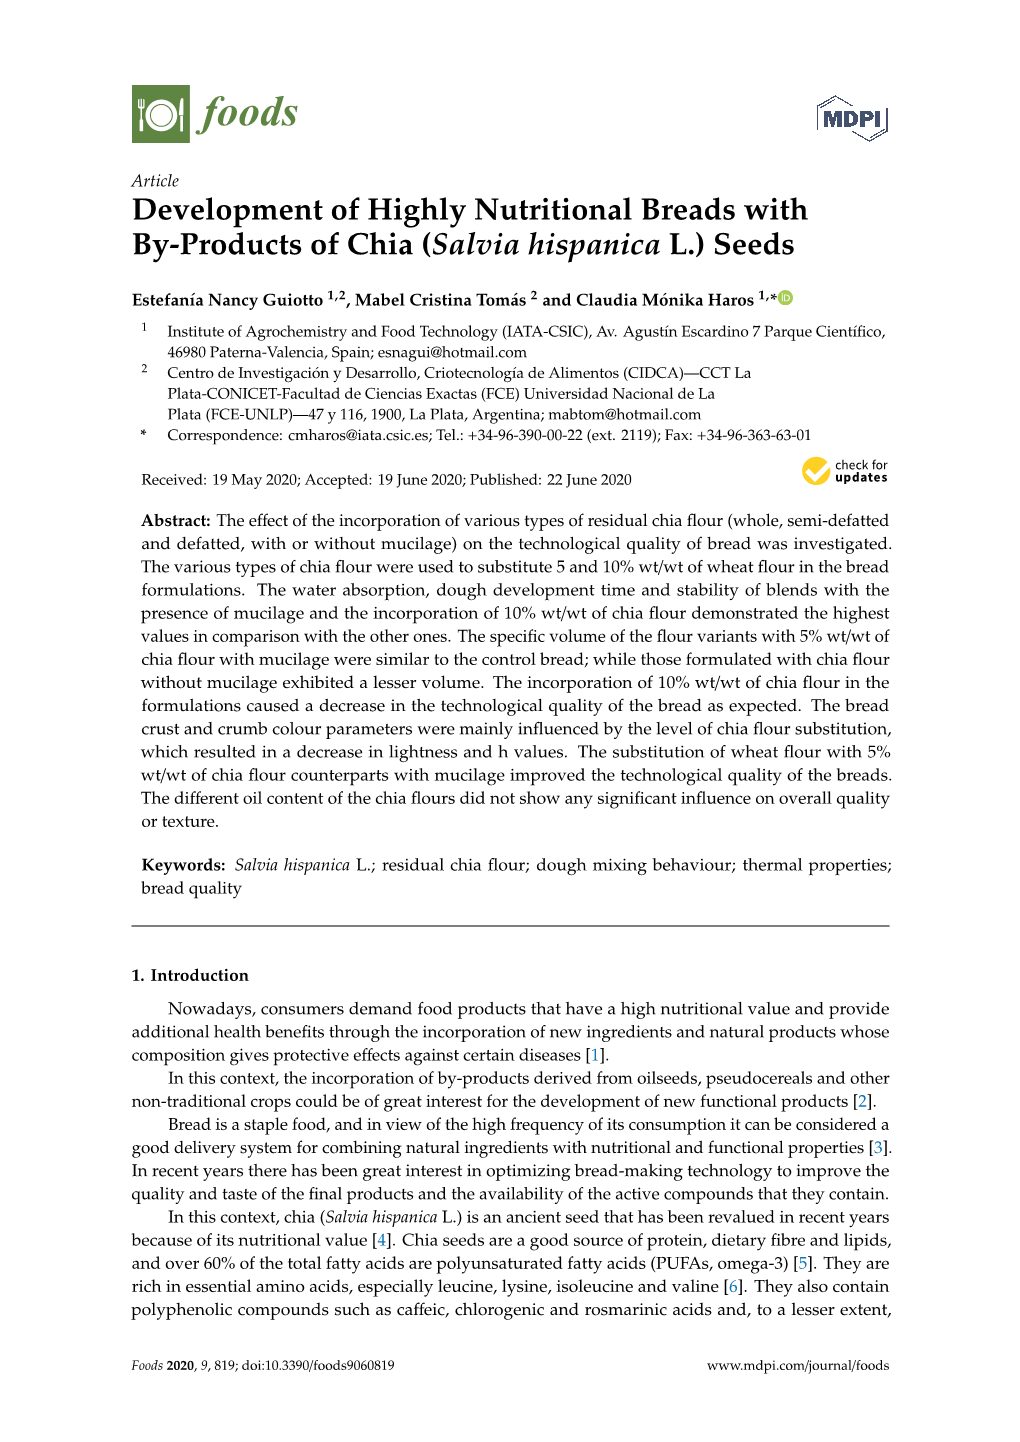 Development of Highly Nutritional Breads with By-Products of Chia (Salvia Hispanica L.) Seeds